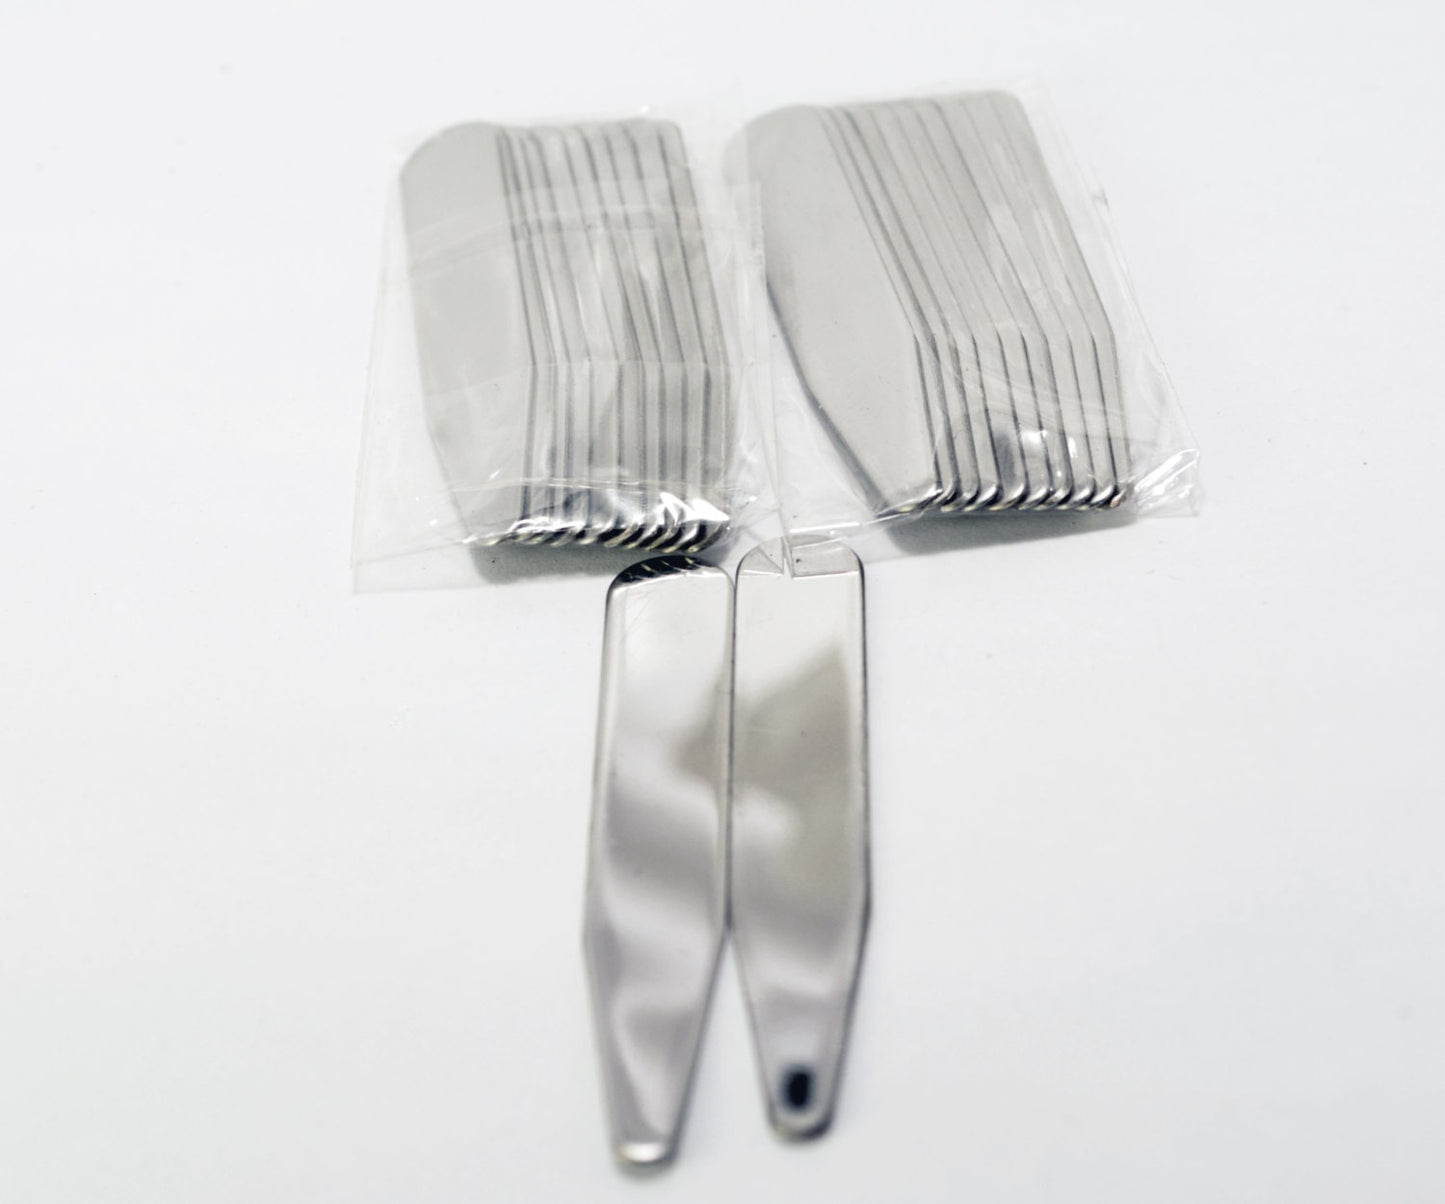 Set of 5  matte metal COLLAR STAYS / TIPS - 4 sizes: 2 1/4", 2 1/2", 2 3/4, 3" long x 3/8" (9mm) wide + add storage box